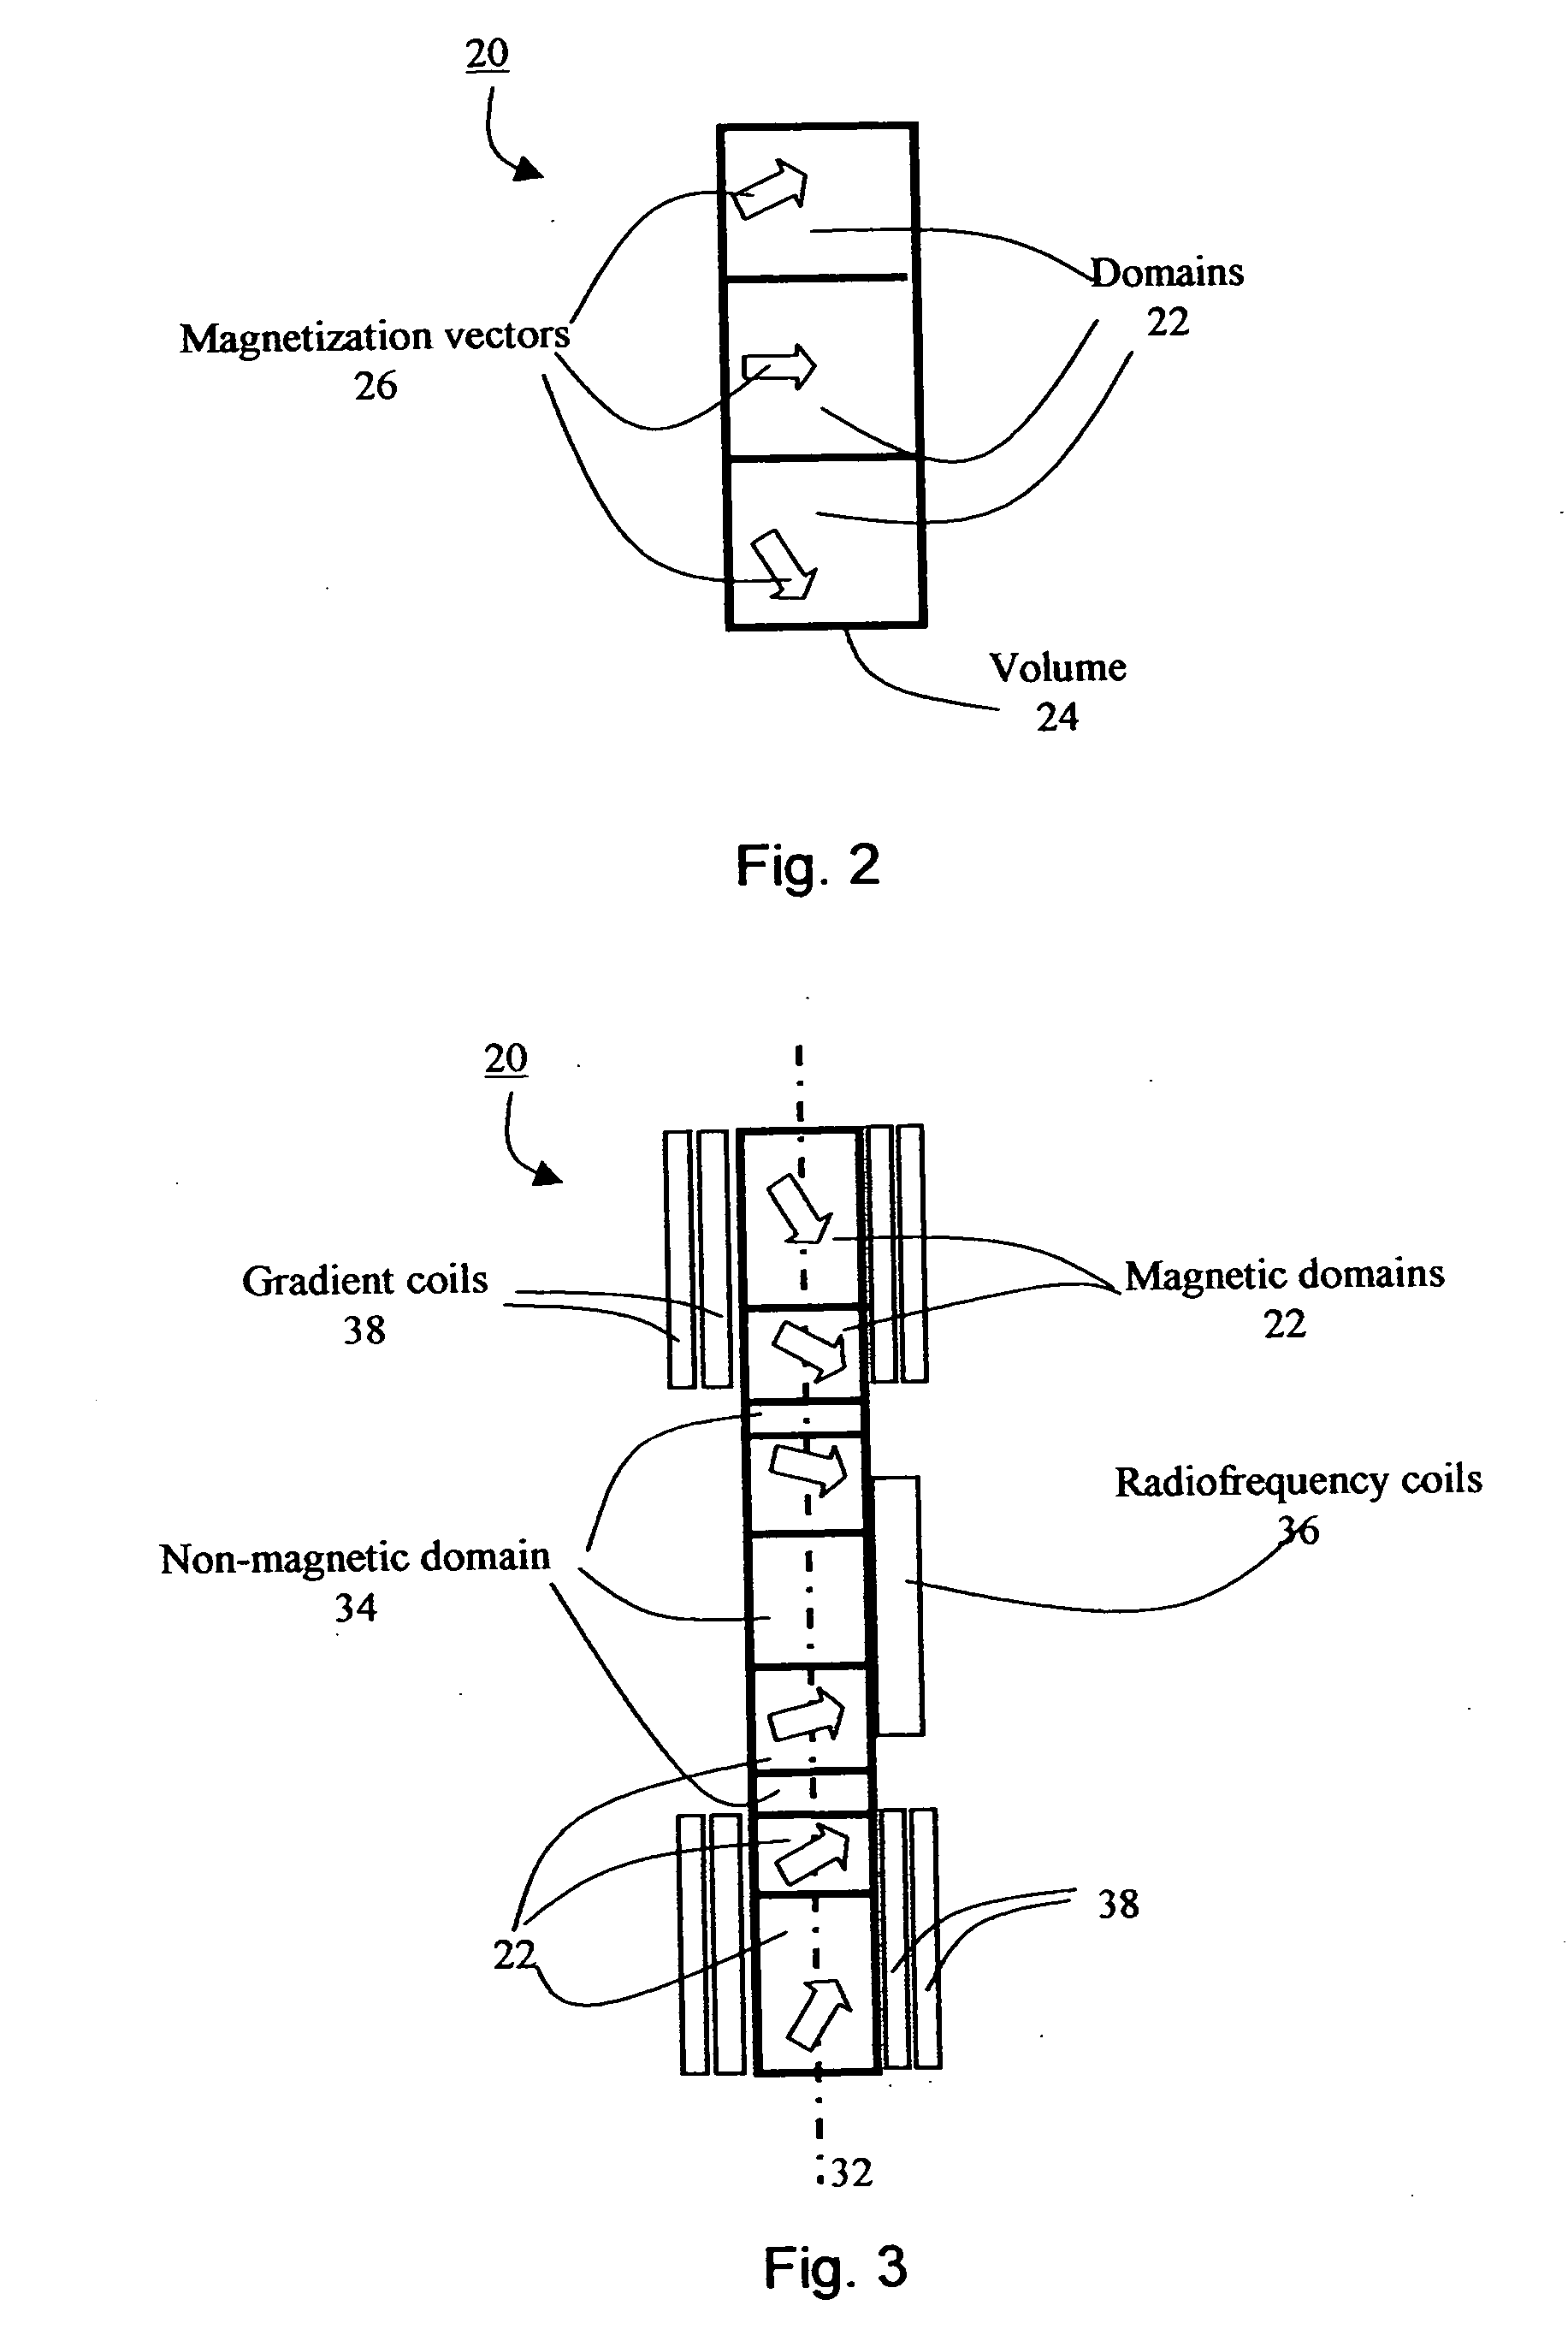 Method and apparatus for magnetic resonance analysis